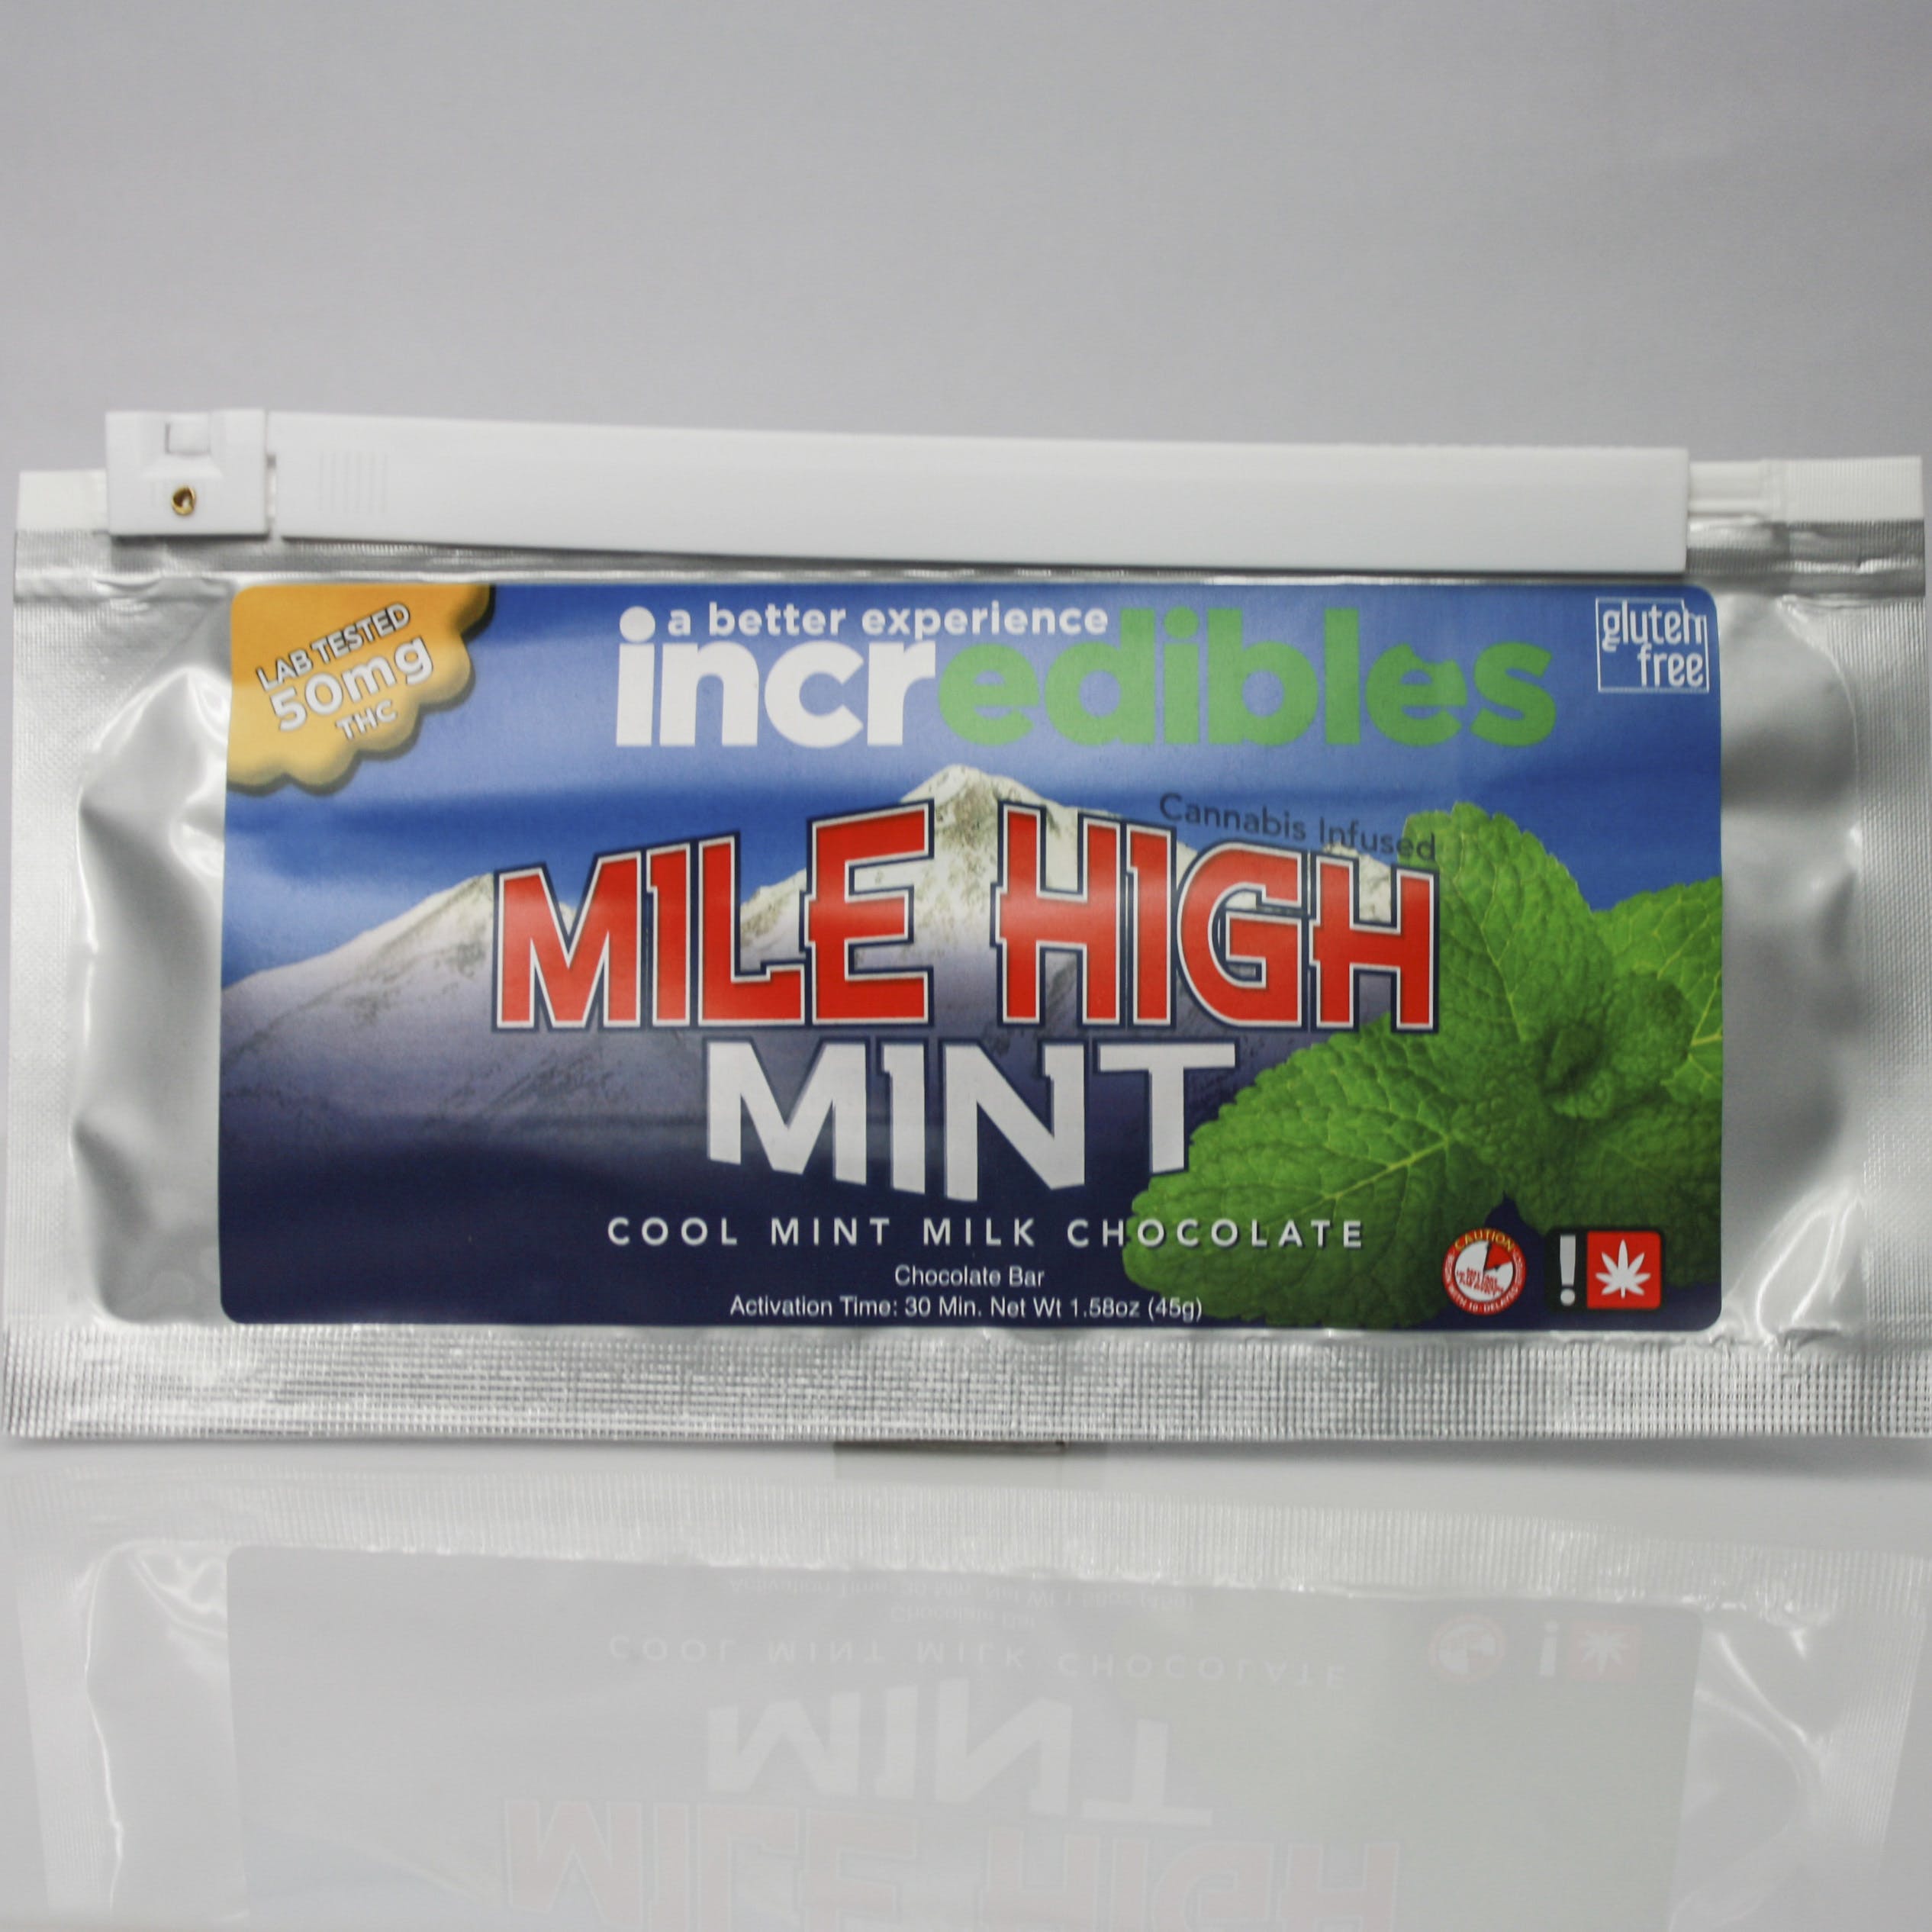 Mile High Mint IncrEDIBLES